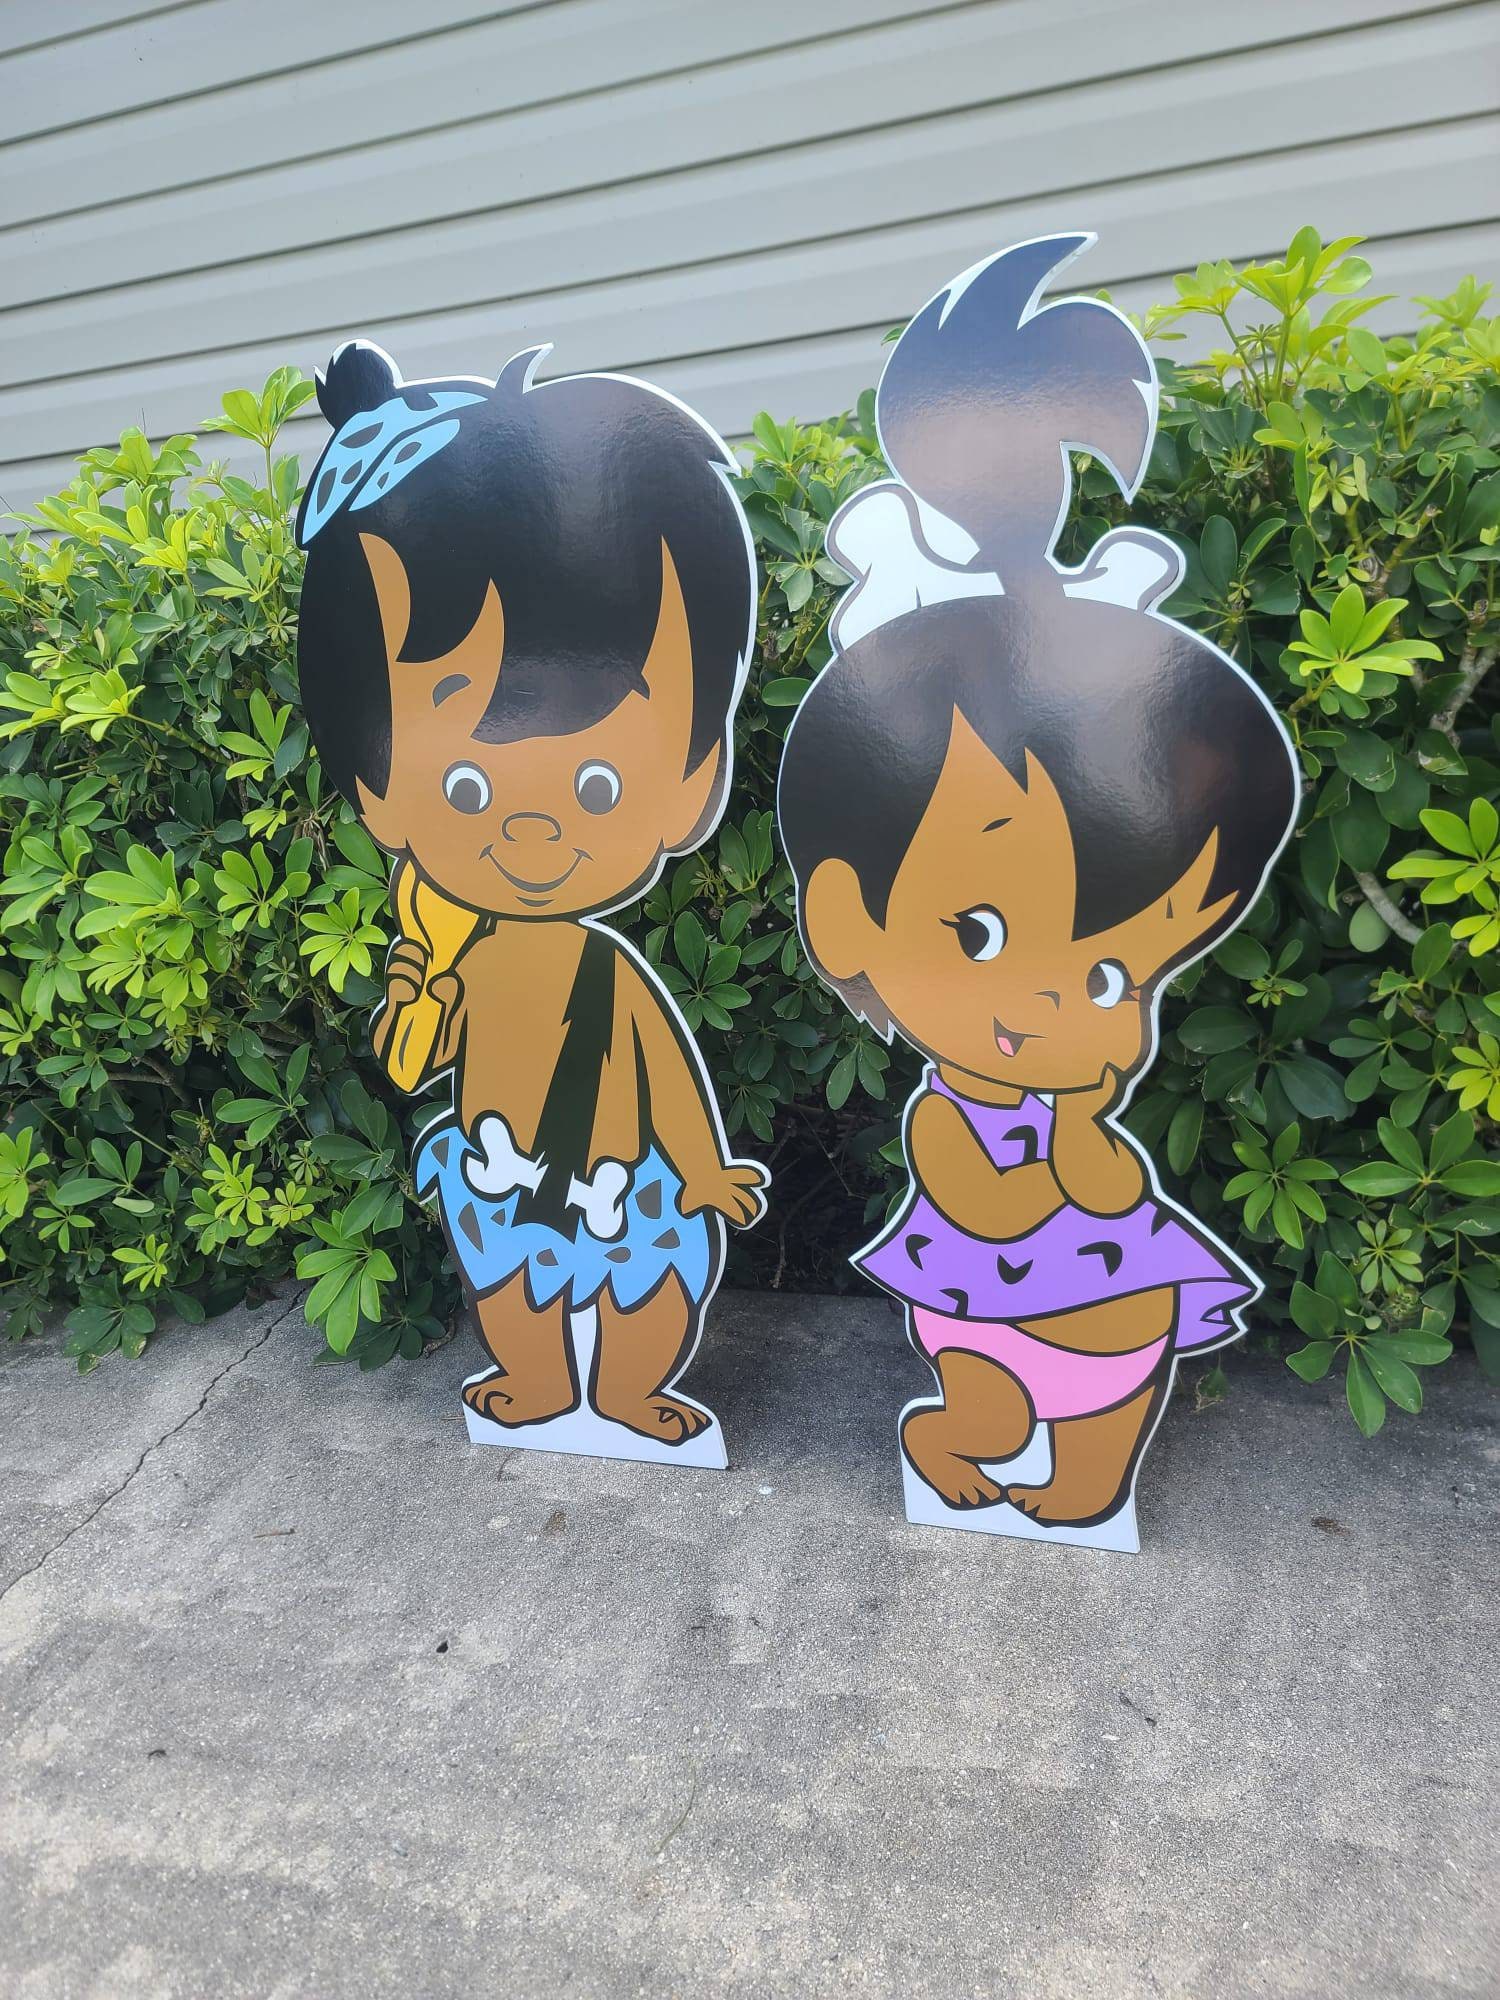 Anime bambam Birthday Party Supplies, Garden of bam bam Party Decorations  Included Birthday banner, …See more Anime bambam Birthday Party Supplies